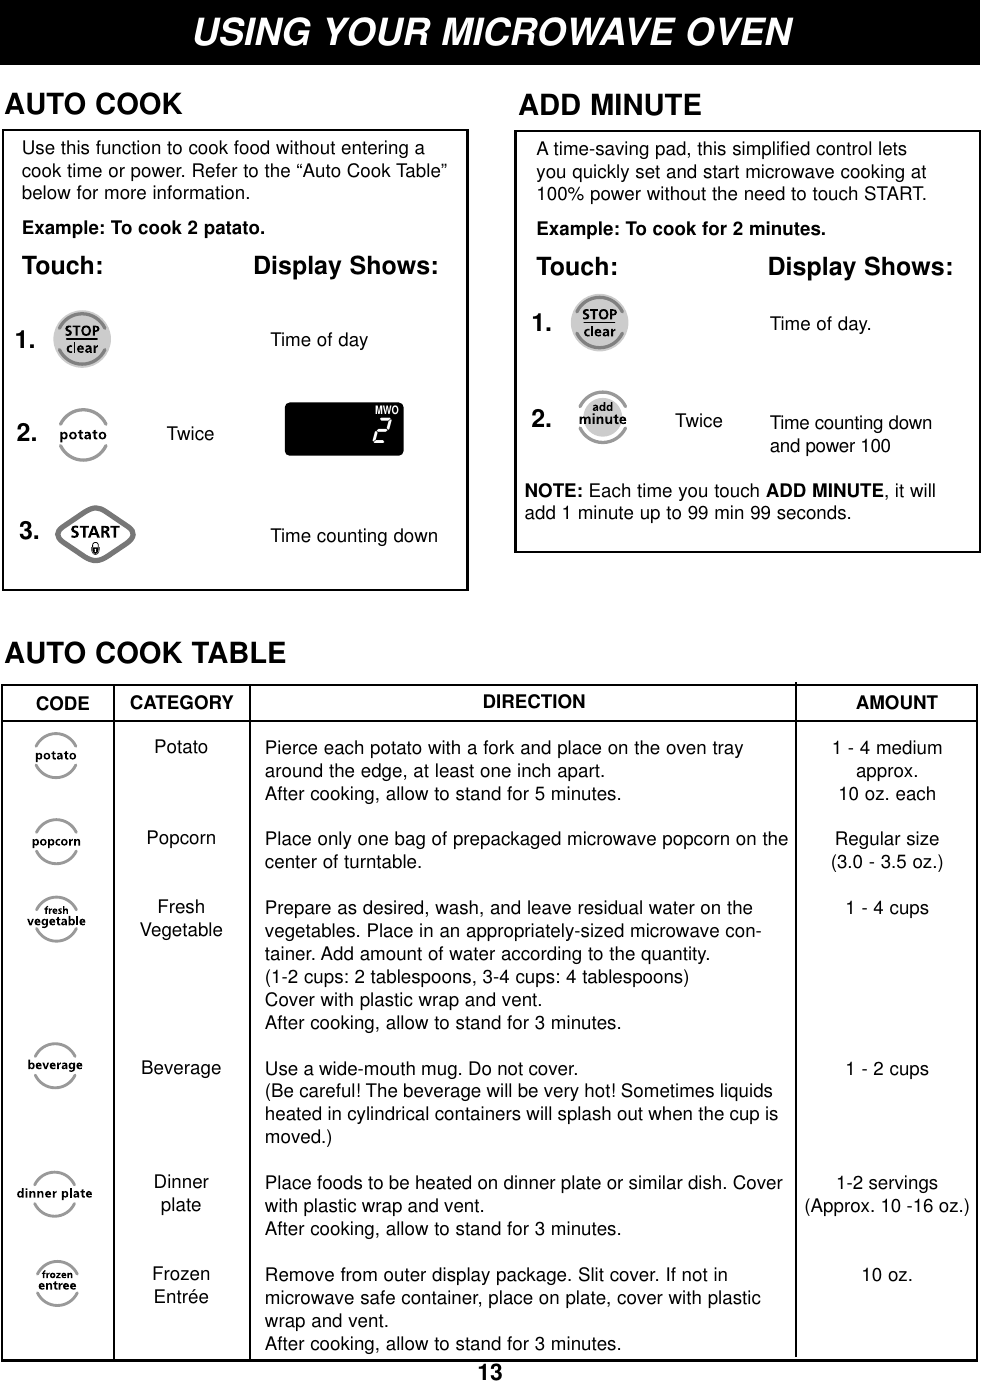 ENGLISH13Time of day.TwiceUSING YOUR MICROWAVE OVENADD MINUTEA time-saving pad, this simplified control letsyou quickly set and start microwave cooking at100% power without the need to touch START.Example: To cook for 2 minutes.Touch: Display Shows:1.2.NOTE: Each time you touch ADD MINUTE, it willadd 1 minute up to 99 min 99 seconds.Time counting downand power 100AUTO COOKAUTO COOK TABLEUse this function to cook food without entering acook time or power. Refer to the “Auto Cook Table”below for more information.Example: To cook 2 patato.Touch: Display Shows:1.Time counting down 2.3.Time of dayDIRECTIONCODE CATEGORYPotatoPopcornFreshVegetableBeverageDinnerplateFrozenEntréeAMOUNT1 - 4 mediumapprox. 10 oz. eachRegular size(3.0 - 3.5 oz.)1 - 4 cups1 - 2 cups1-2 servings(Approx. 10 -16 oz.)10 oz. Pierce each potato with a fork and place on the oven trayaround the edge, at least one inch apart.After cooking, allow to stand for 5 minutes.Place only one bag of prepackaged microwave popcorn on thecenter of turntable.Prepare as desired, wash, and leave residual water on thevegetables. Place in an appropriately-sized microwave con-tainer. Add amount of water according to the quantity.(1-2 cups: 2 tablespoons, 3-4 cups: 4 tablespoons)Cover with plastic wrap and vent.After cooking, allow to stand for 3 minutes.Use a wide-mouth mug. Do not cover.(Be careful! The beverage will be very hot! Sometimes liquidsheated in cylindrical containers will splash out when the cup ismoved.)Place foods to be heated on dinner plate or similar dish. Coverwith plastic wrap and vent.After cooking, allow to stand for 3 minutes.Remove from outer display package. Slit cover. If not inmicrowave safe container, place on plate, cover with plasticwrap and vent.After cooking, allow to stand for 3 minutes.2MWOTwice